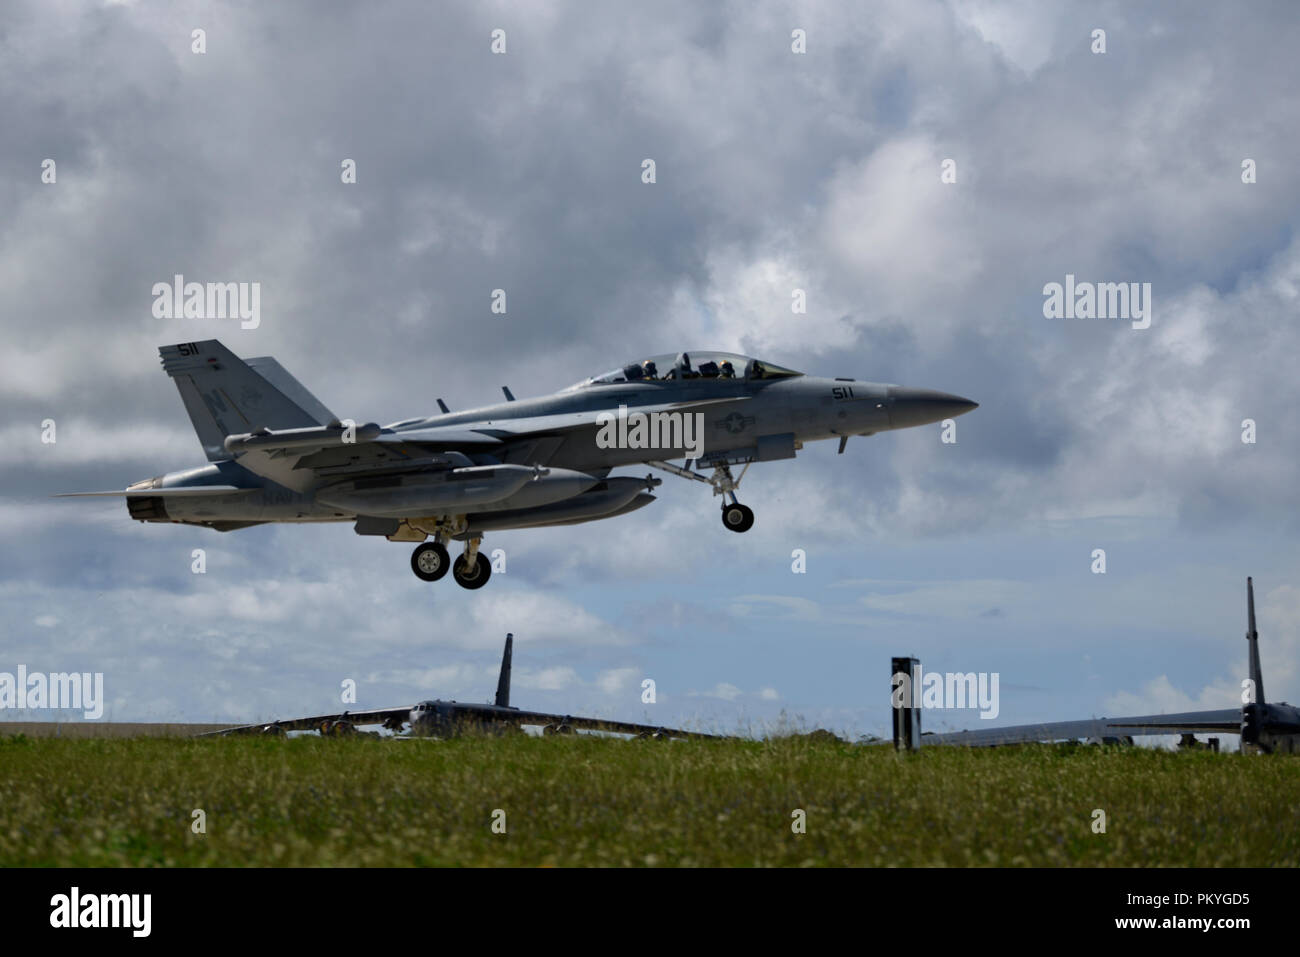 A U.S. Navy E/A-18G Growler assigned to the 'Yellow Jackets' of Electronic Attack Squadron (VAQ) 138 takes off in preparation for exercise Valiant Shield 2018 Sept. 7, 2018, at Andersen Air Force Base, Guam. Valiant Shield is a biennial, U.S. only, field training exercise with a focus on integration of joint training among U.S. forces. (U.S. Air Force photo by Airman 1st Class Gerald R. Willis) Stock Photo